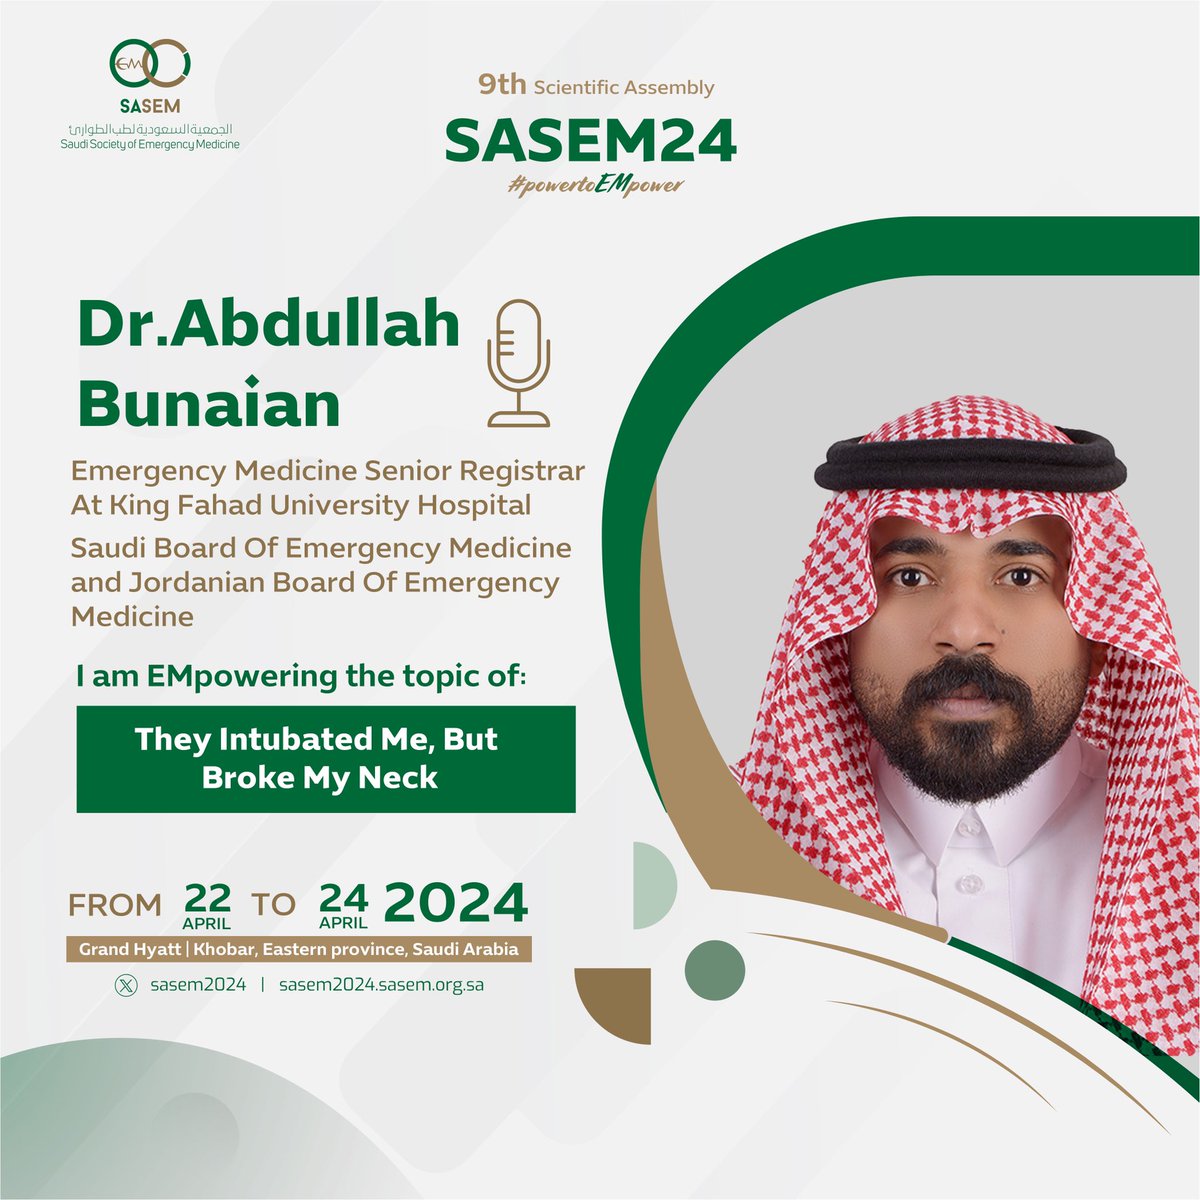 It gives me a great pleasure to present this topic on #SASEM2024. 

SASEM is great opportunity to learn, share experience, and to EMpower your career.

Cannot wait to see you there 🔥